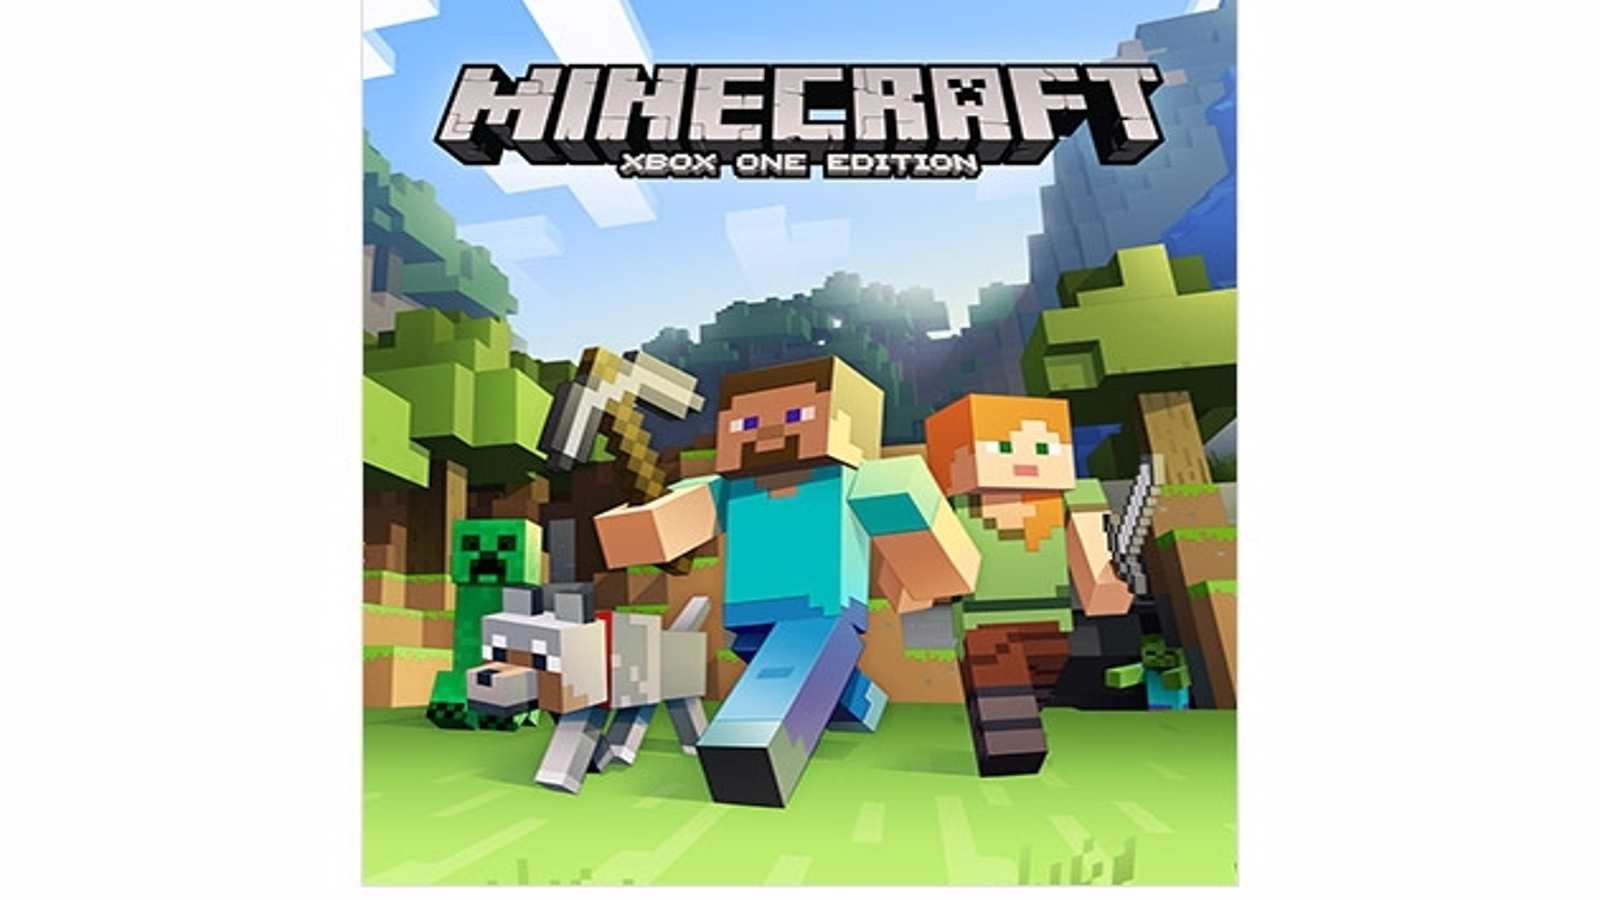 PlayStation not on board with cross-play Minecraft - Polygon